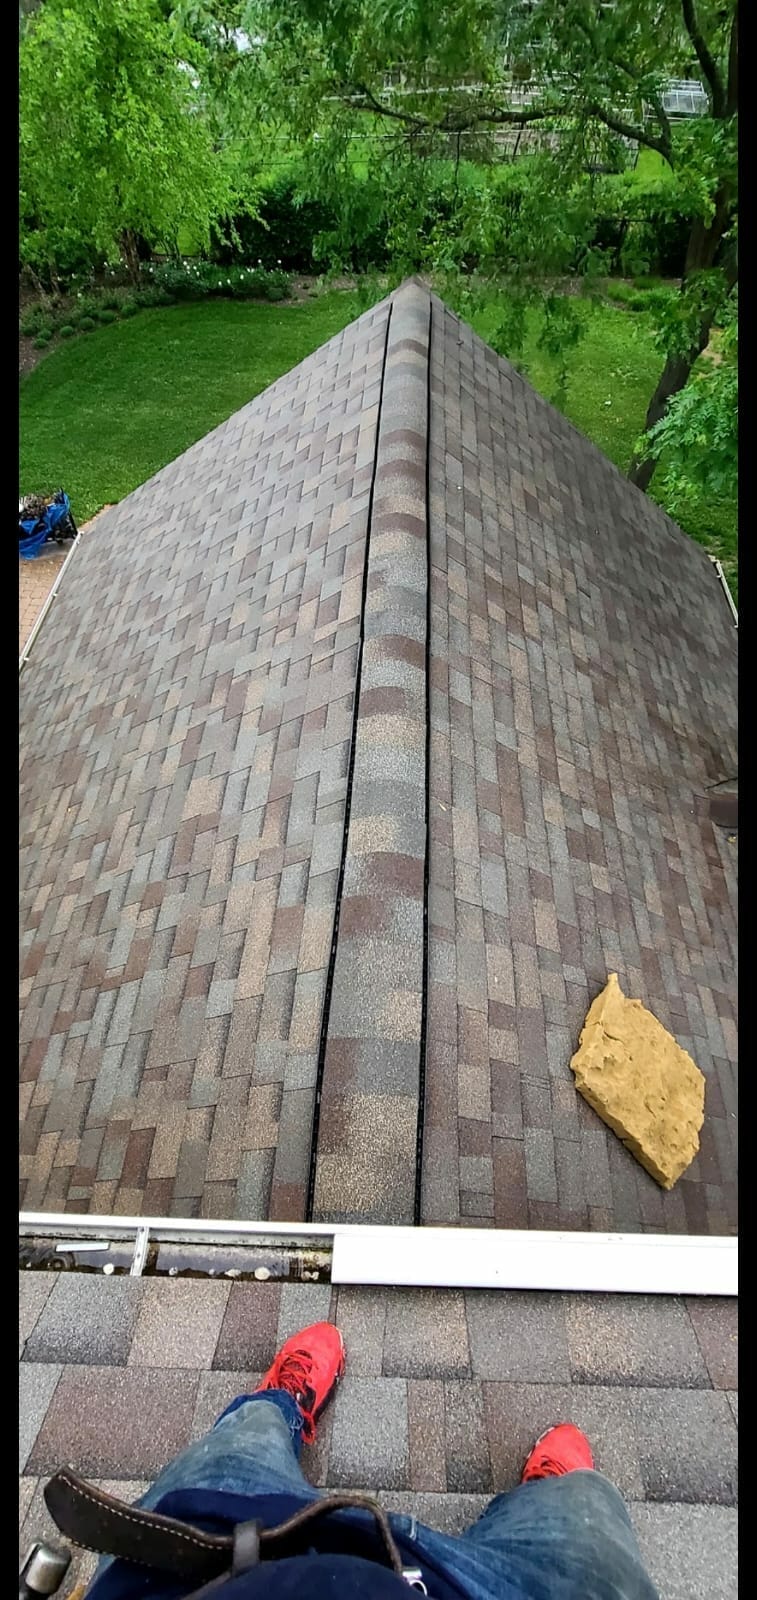 roof replacement, asphalt shingle roof, Lake County